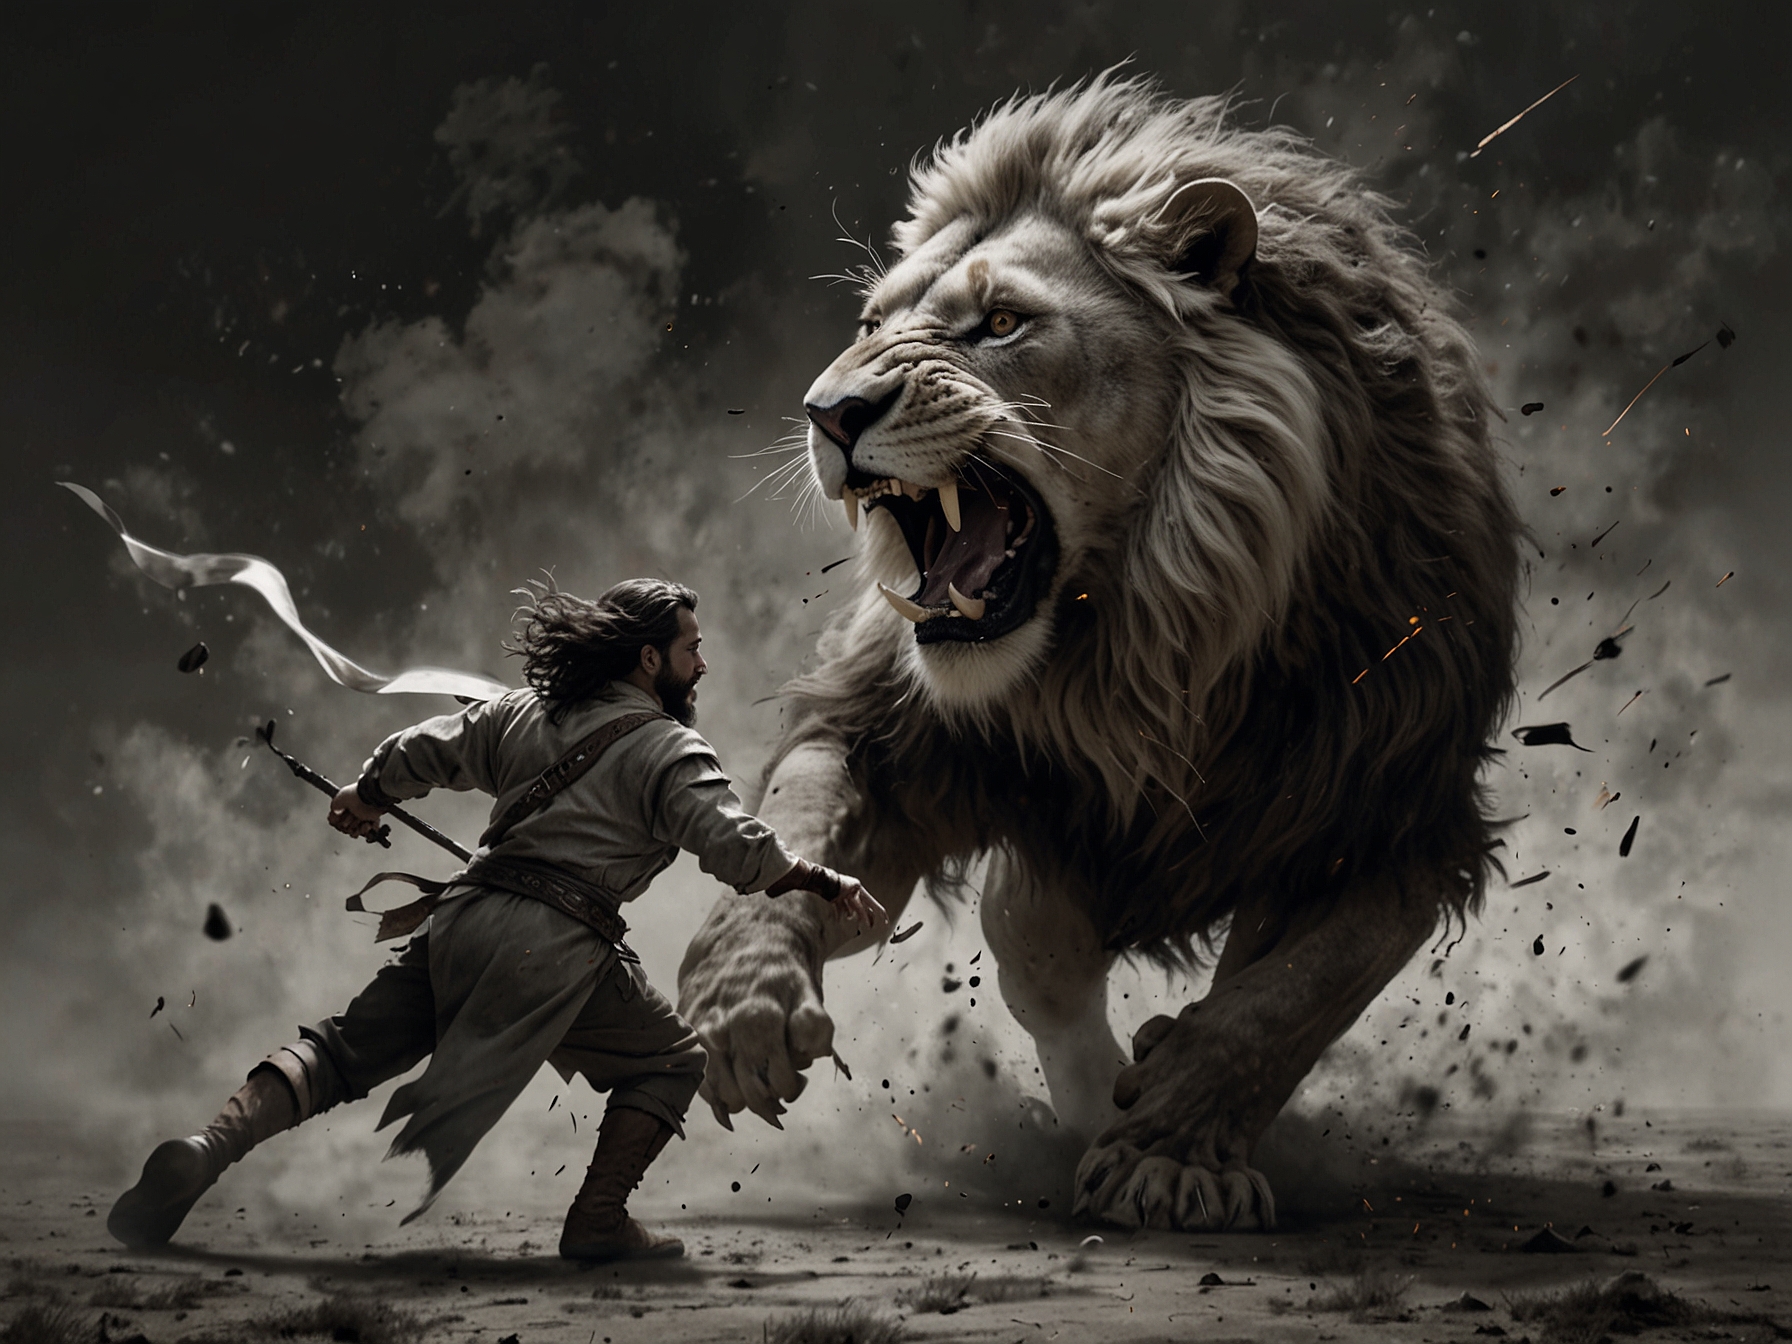 An intense battle scene featuring the Divine Beast Dancing Lion lunging towards the player, showcasing the beast's agility and the player's strategic dodge maneuver to avoid the attack.